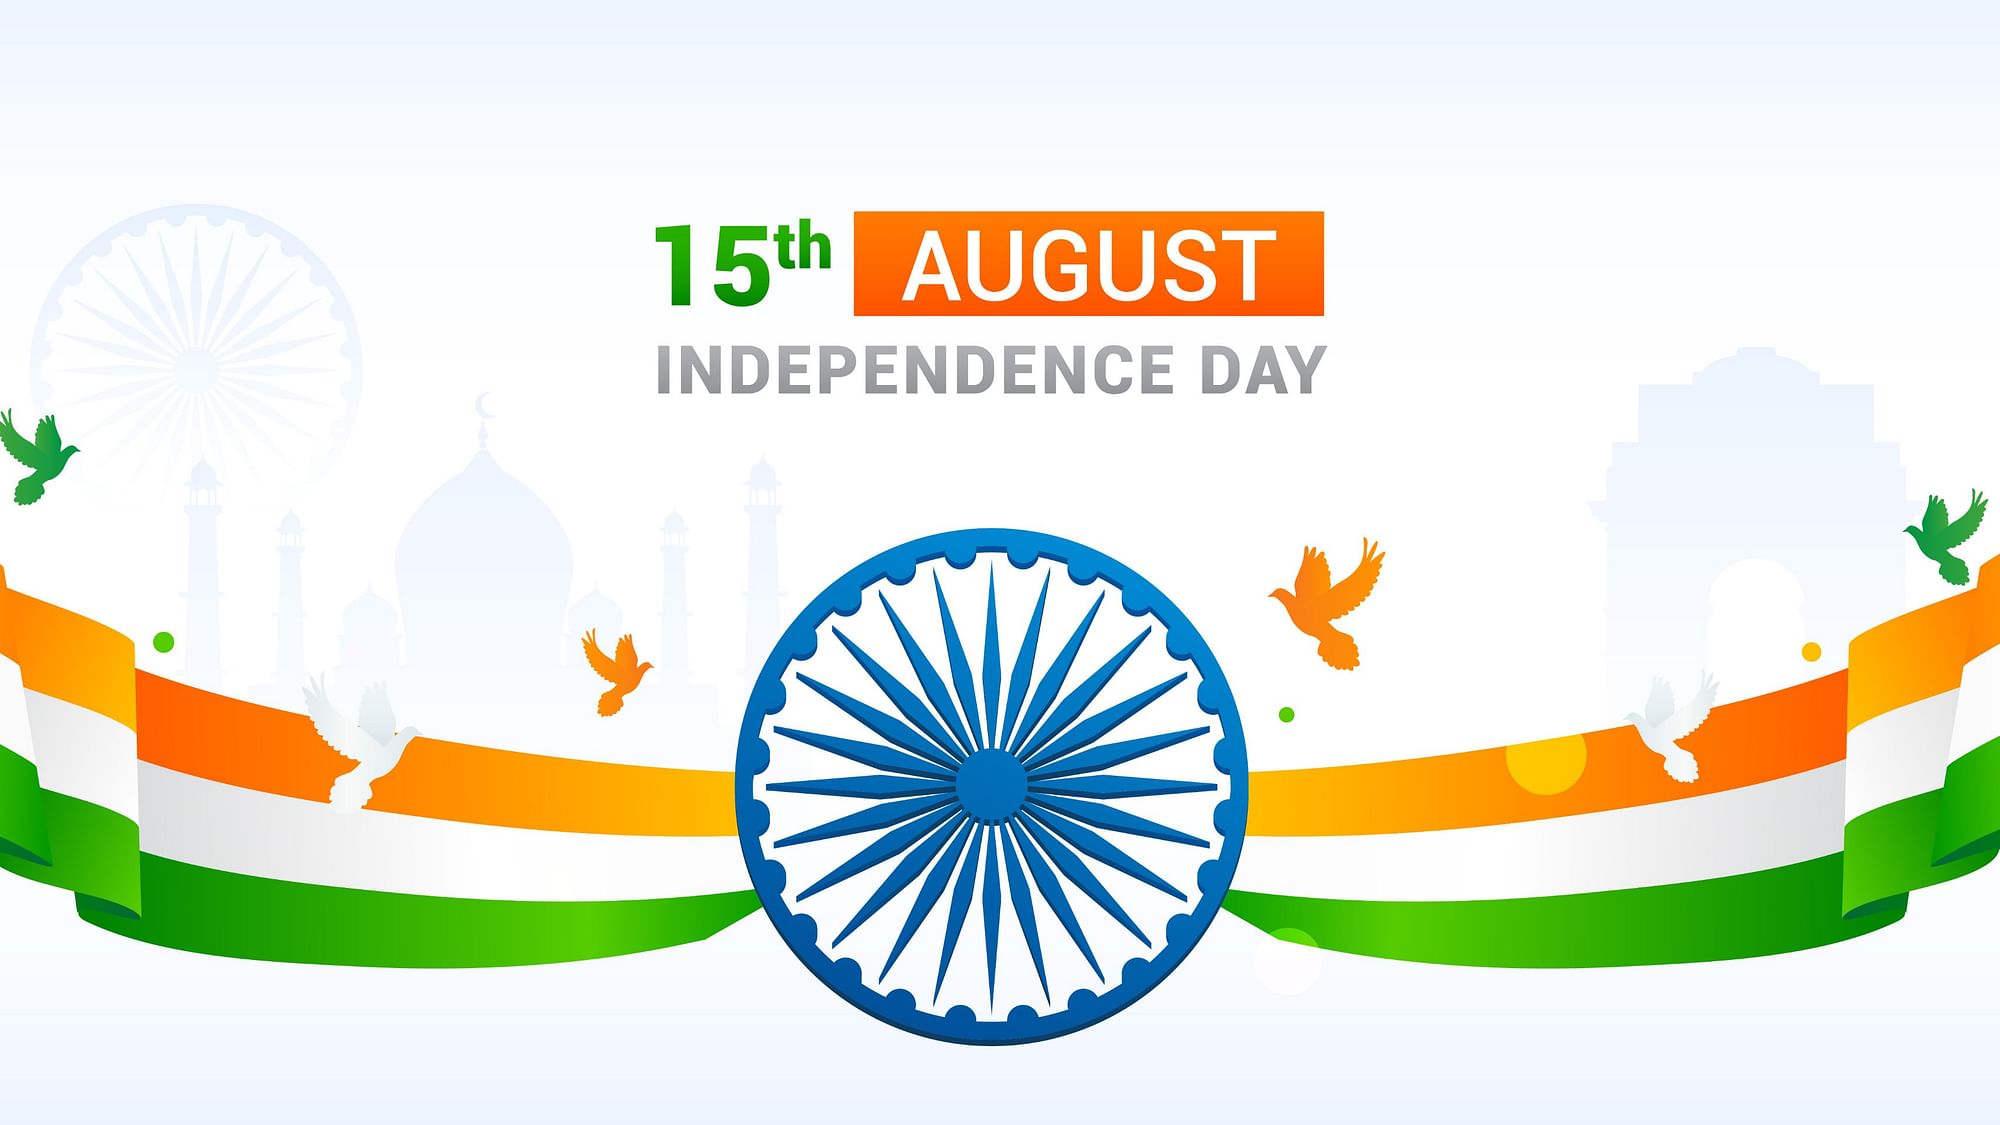 74rd Independence Day Wishes in English.